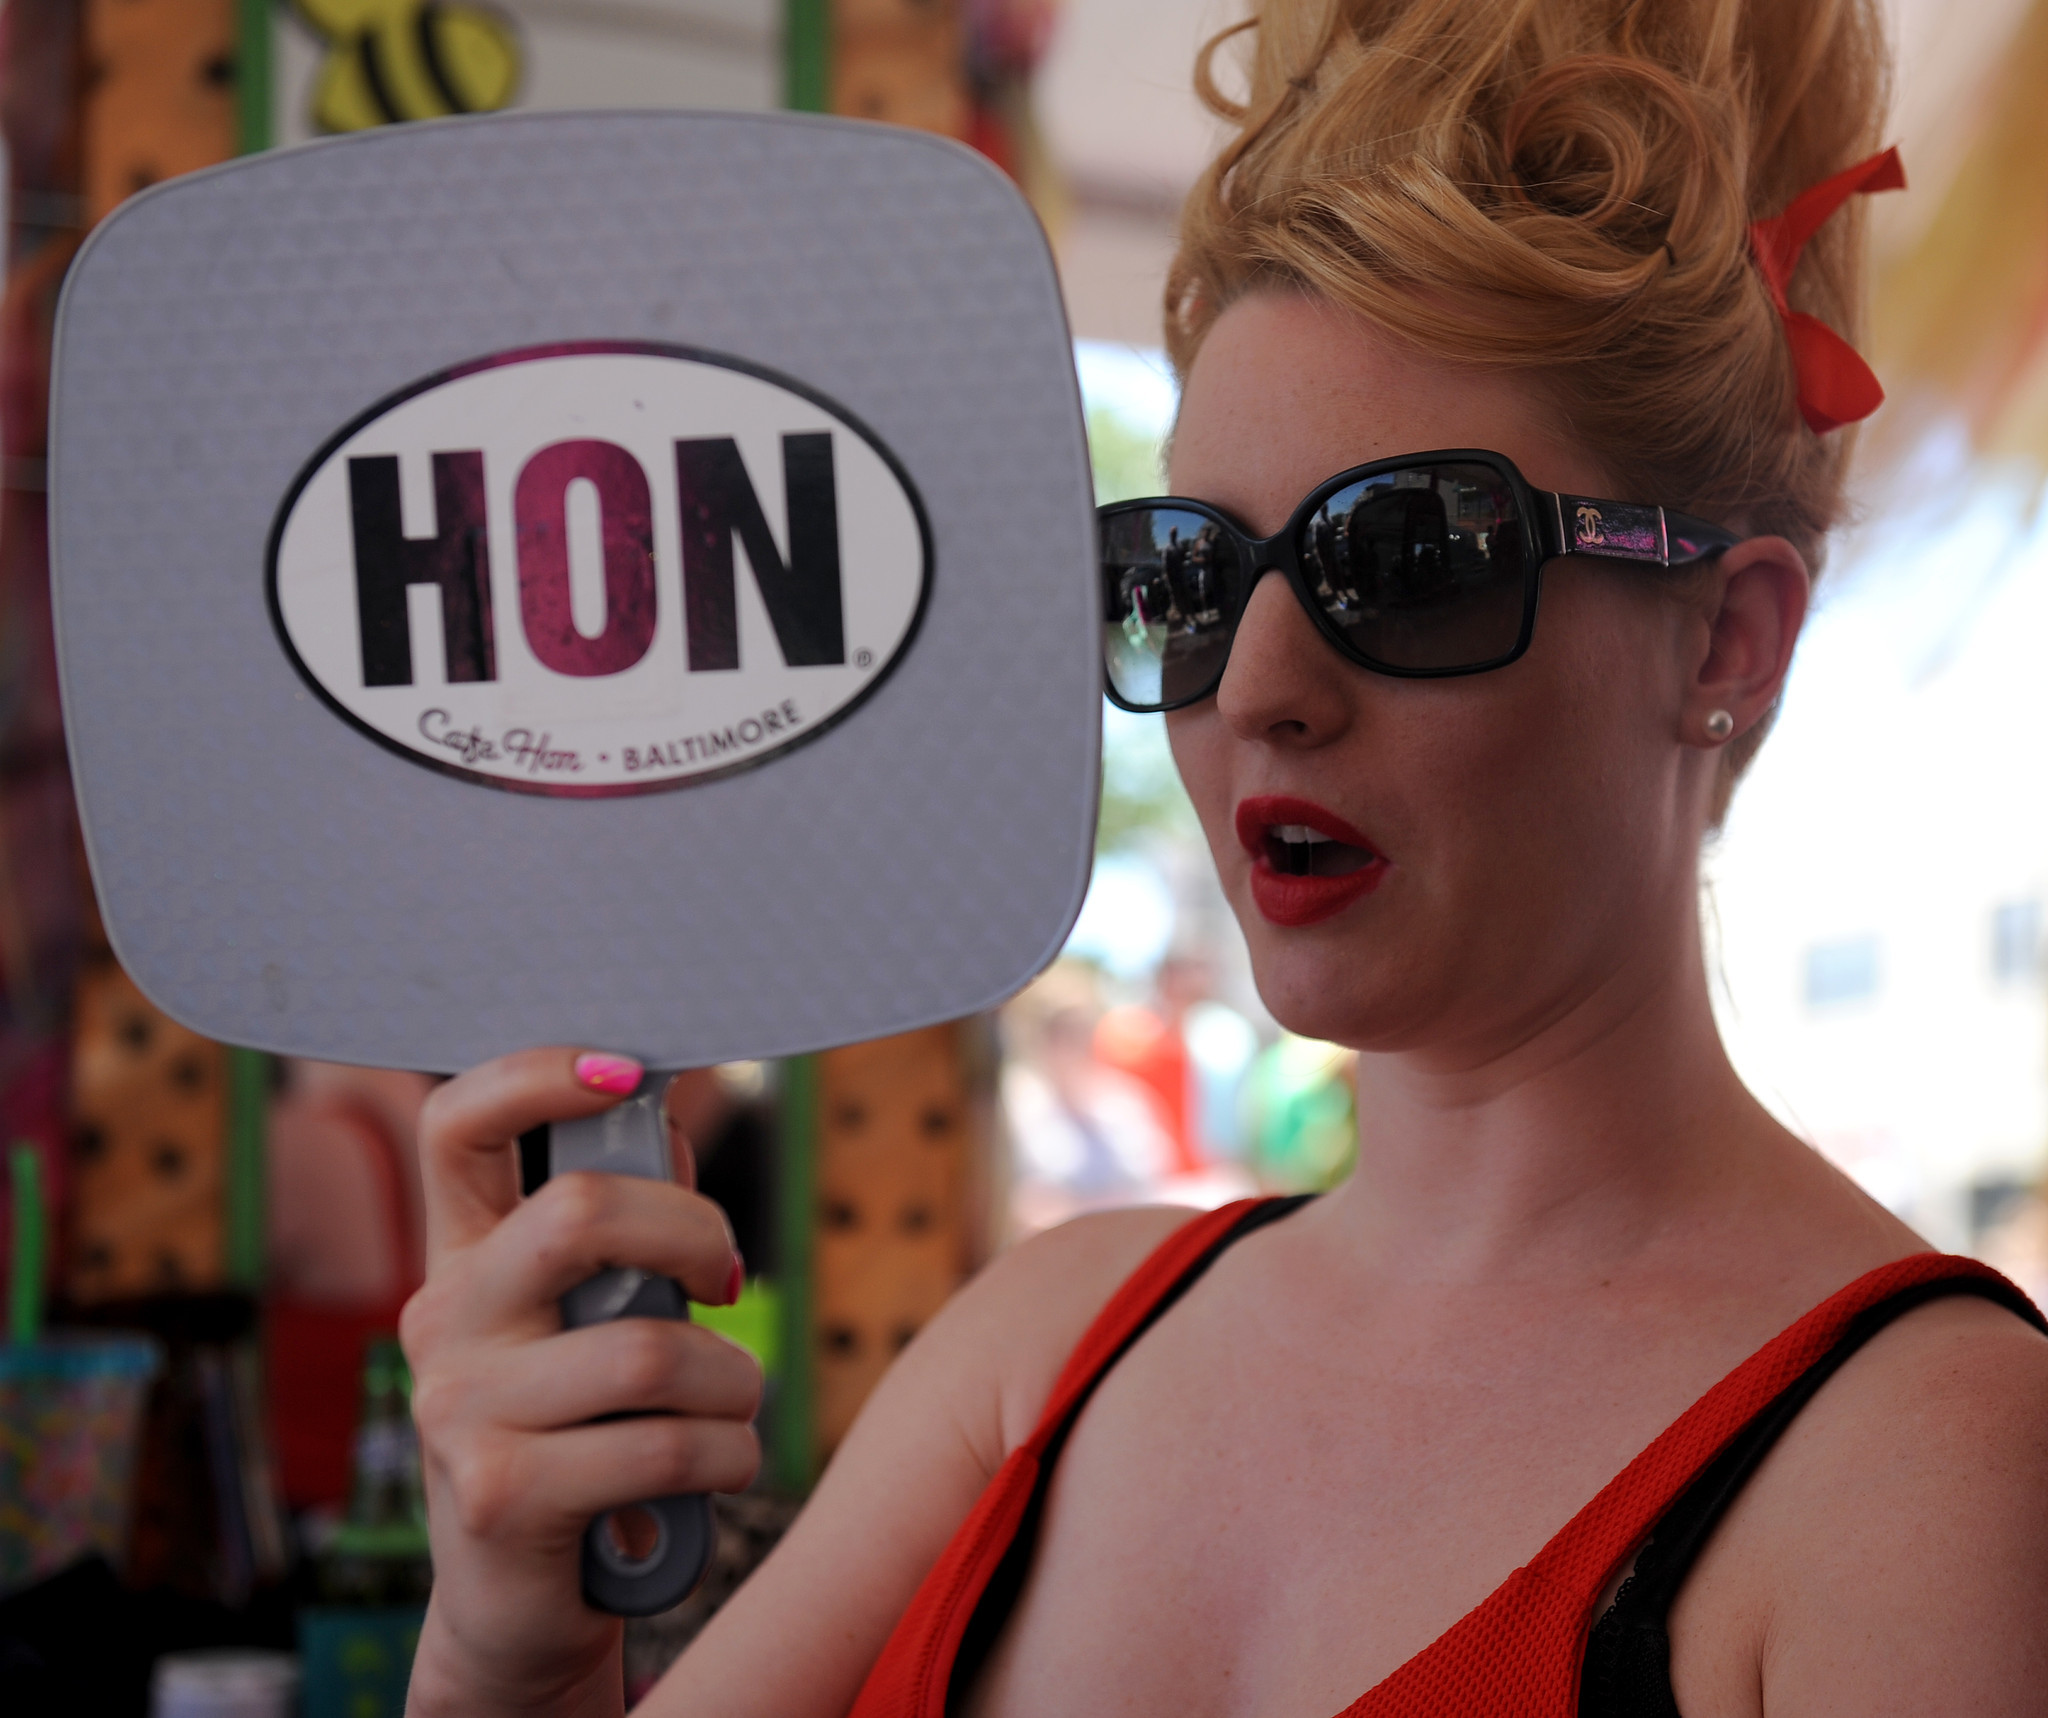 Honfest 2016 brings towering beehives, crowds to Hampden Baltimore Sun